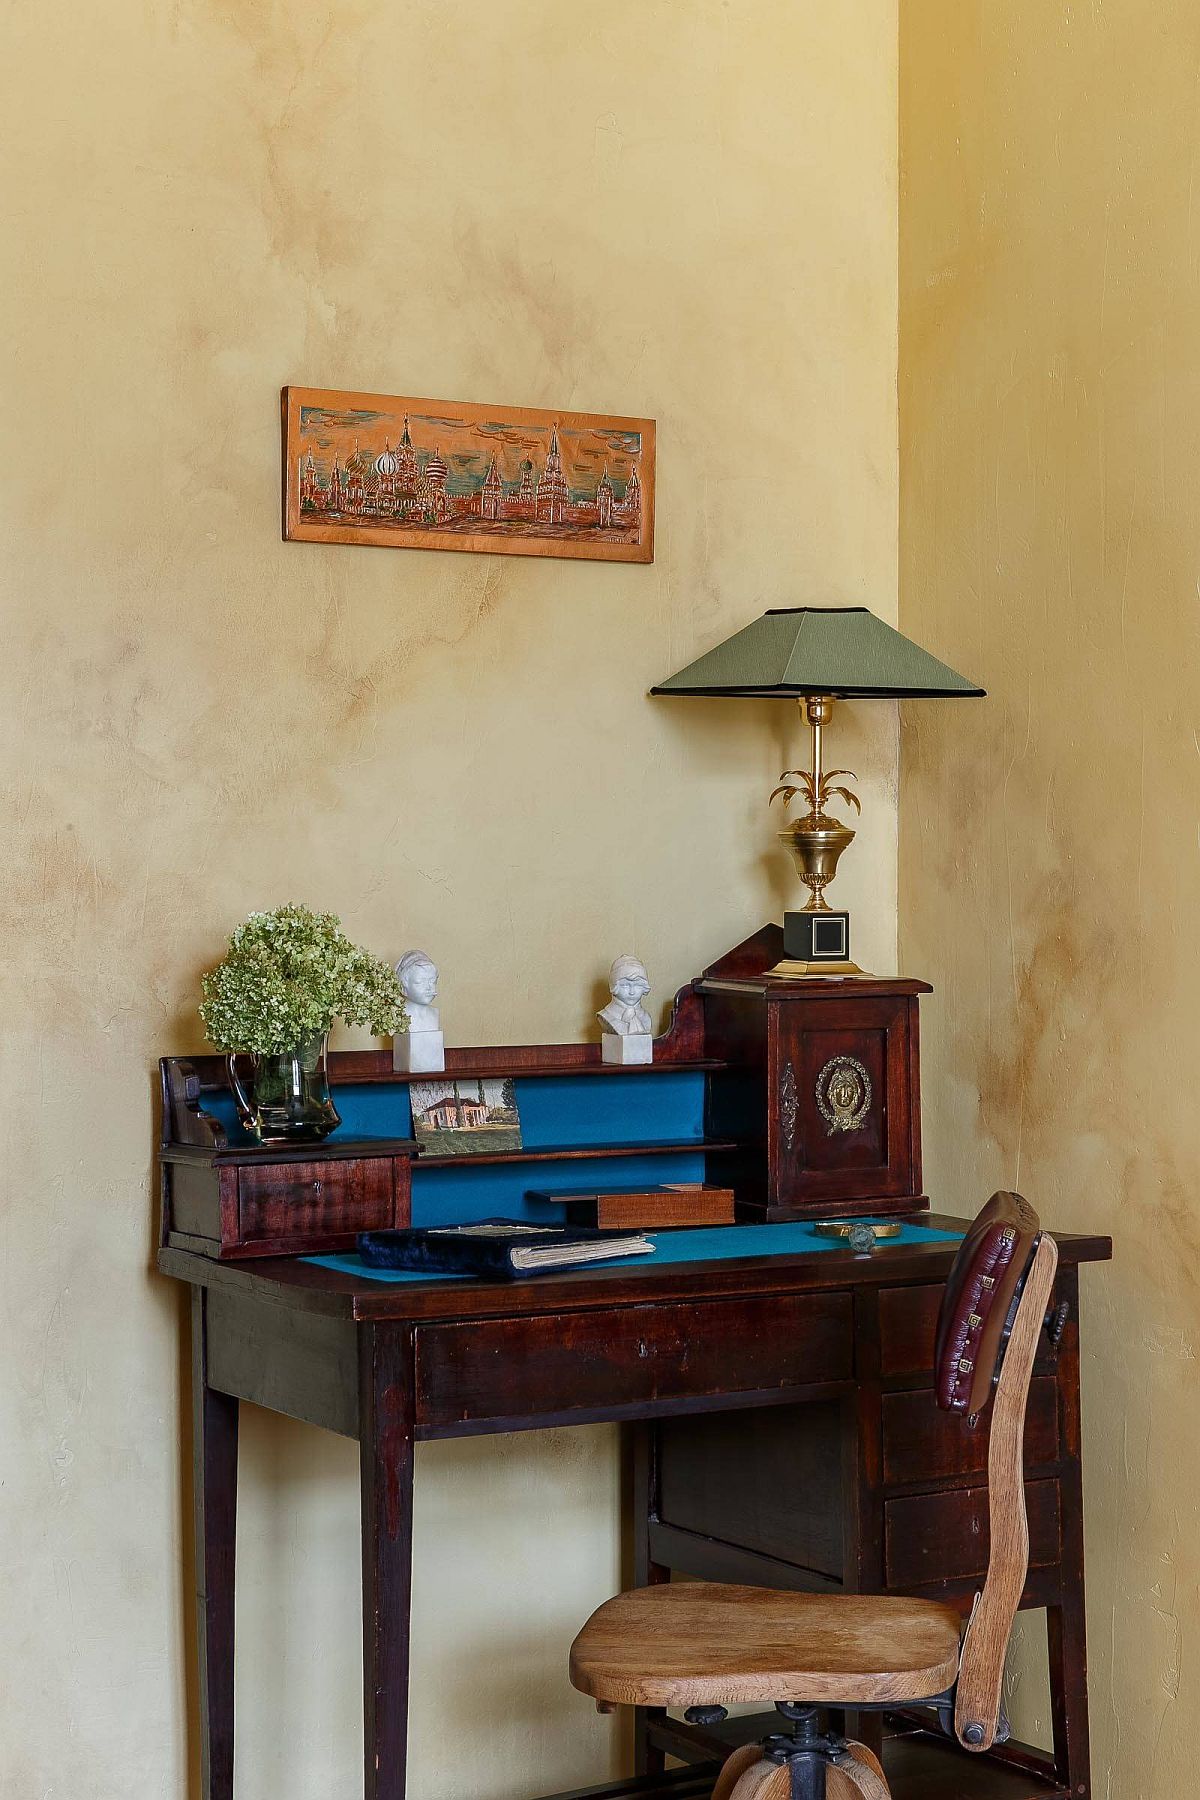 Eclectic-home-workspace-in-the-corner-with-small-freestanding-desk-and-textured-walls-28080